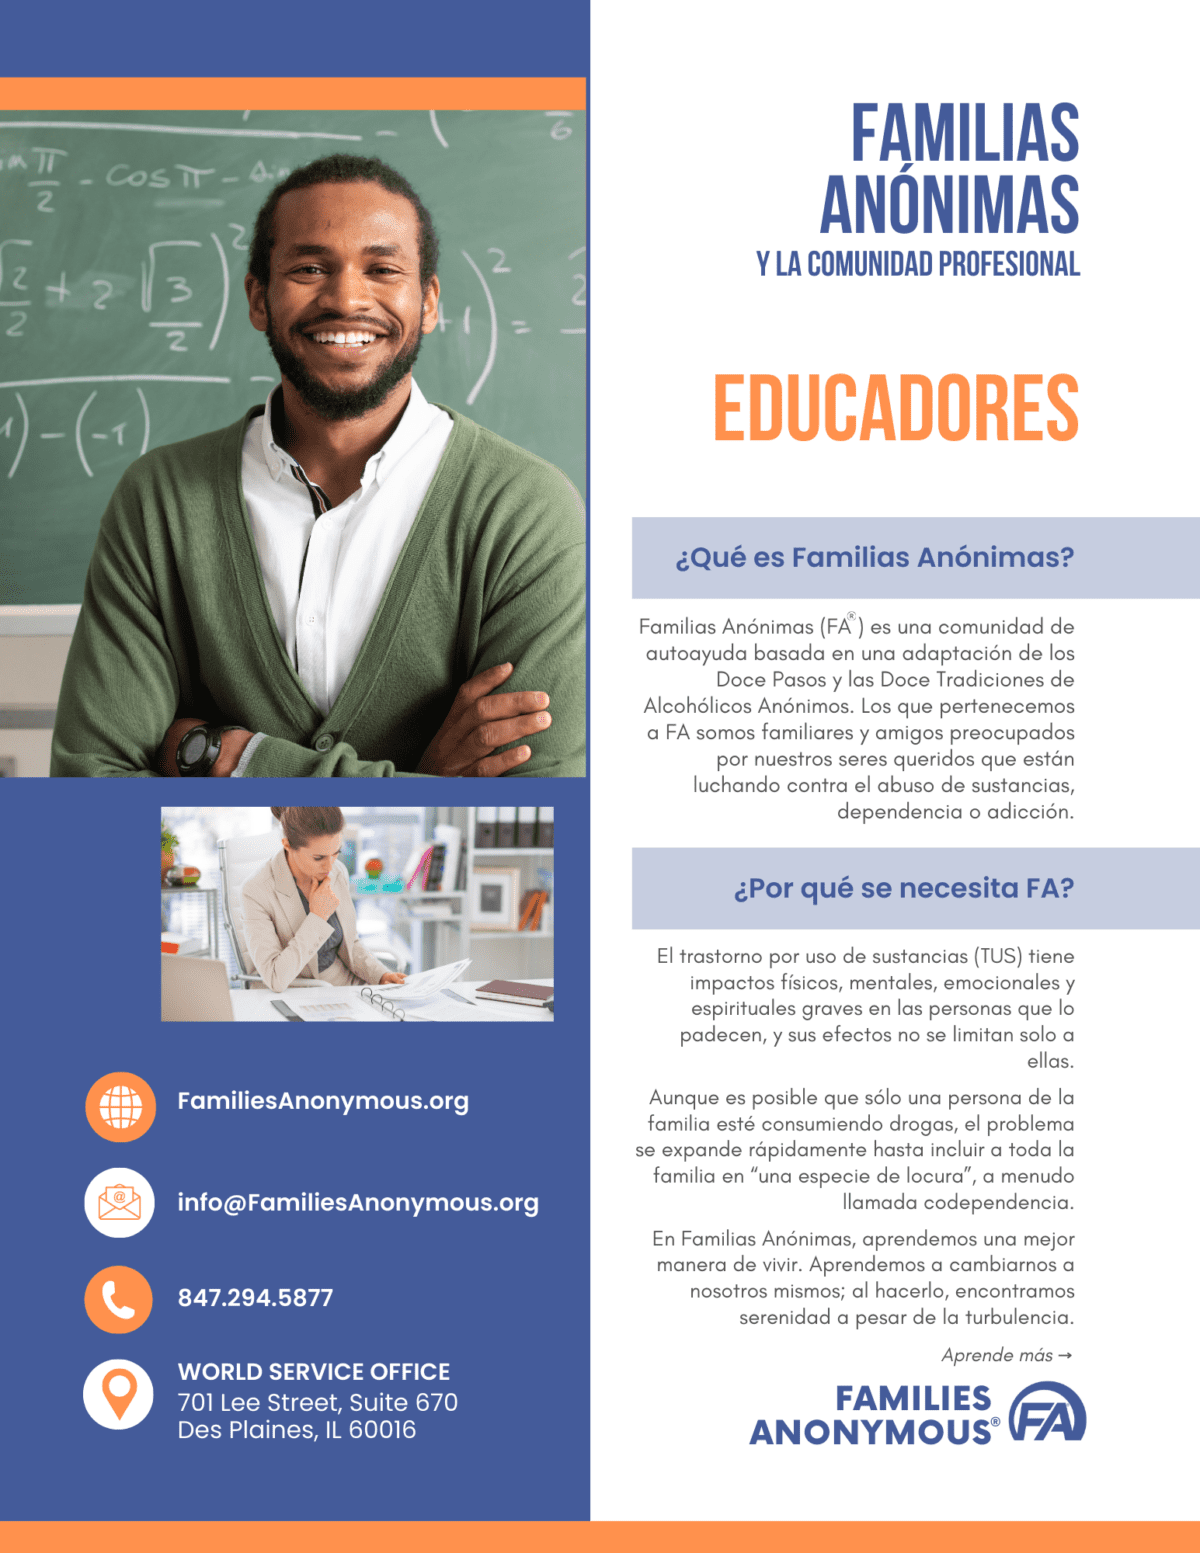 Families Anonymous and the Professional Community – Educators – SPANISH